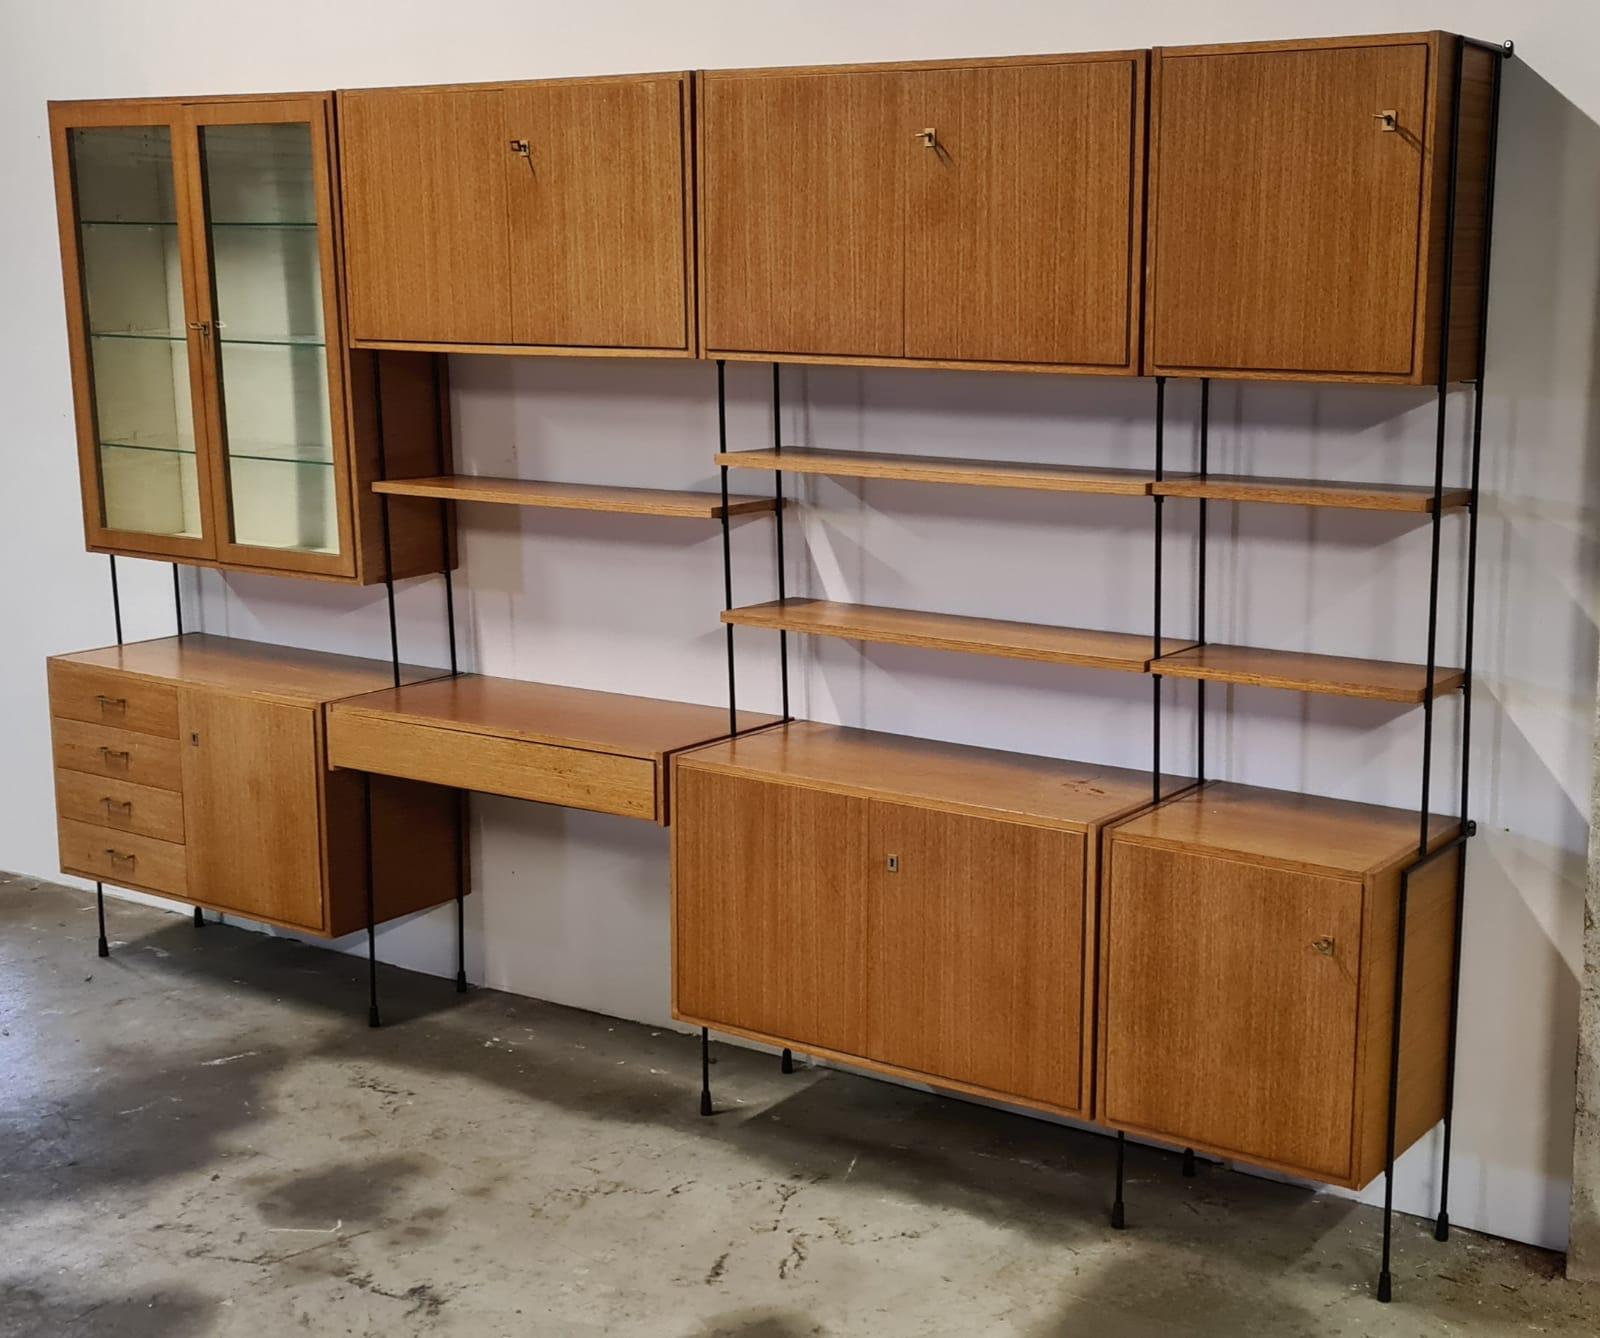 Mid century wall unit in designed by Ersnt Dieter Hilker model 'Omnia'.

The wall unit is completely modular.

Good condition with normal age related wear. 

1960s, Germany

Measures: Width: 315cm/124.01